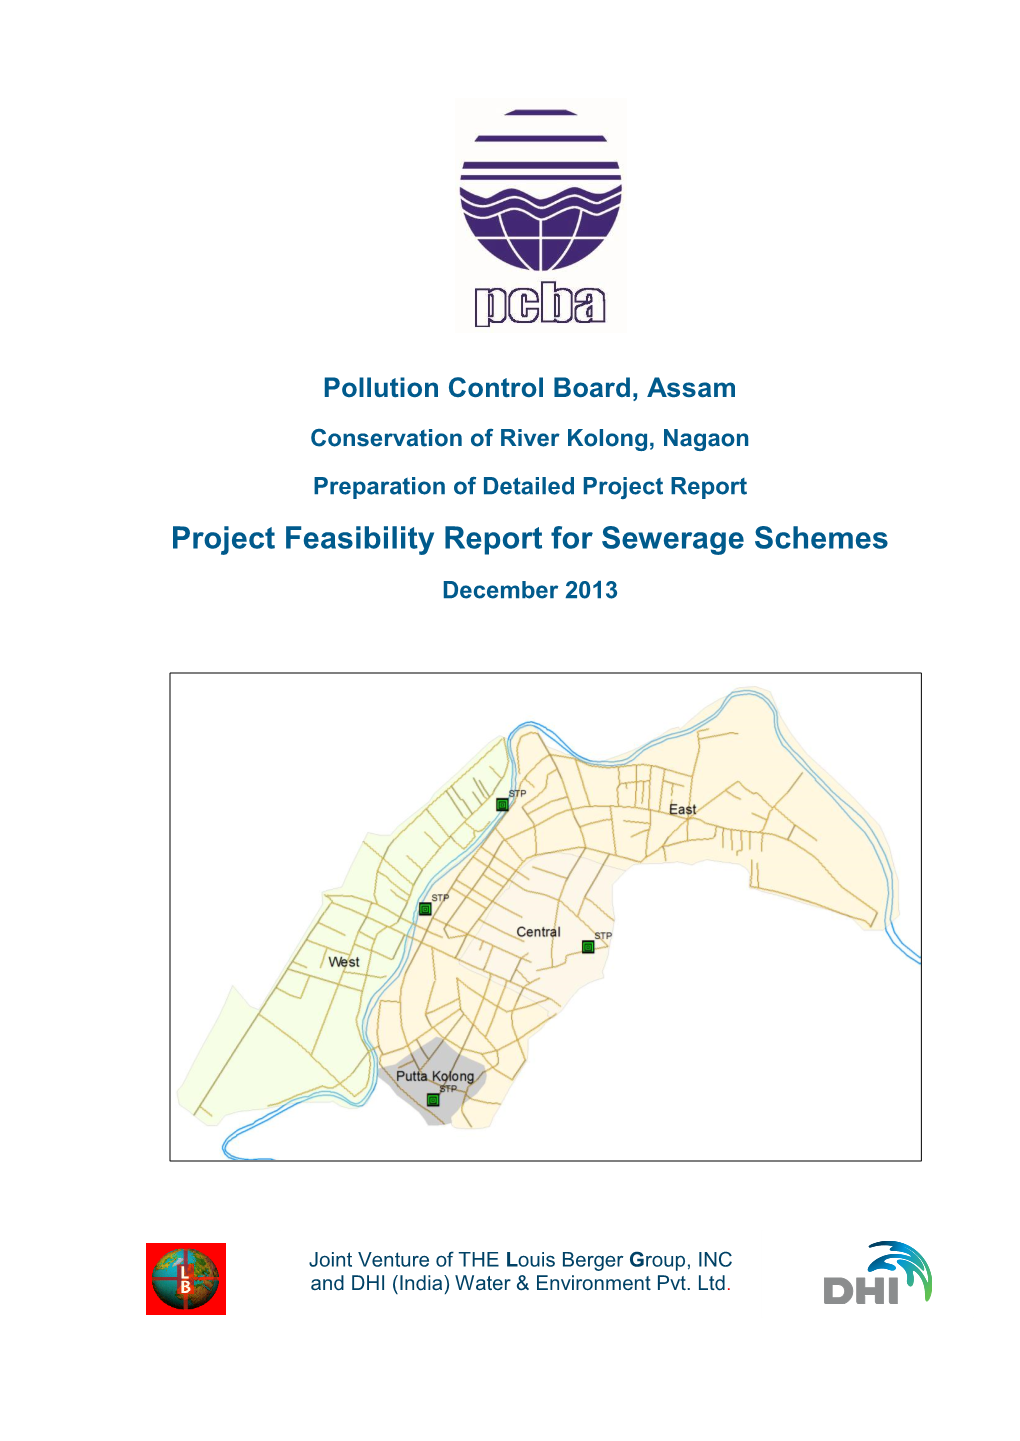 Feasibility Report for Sewerage Schemes